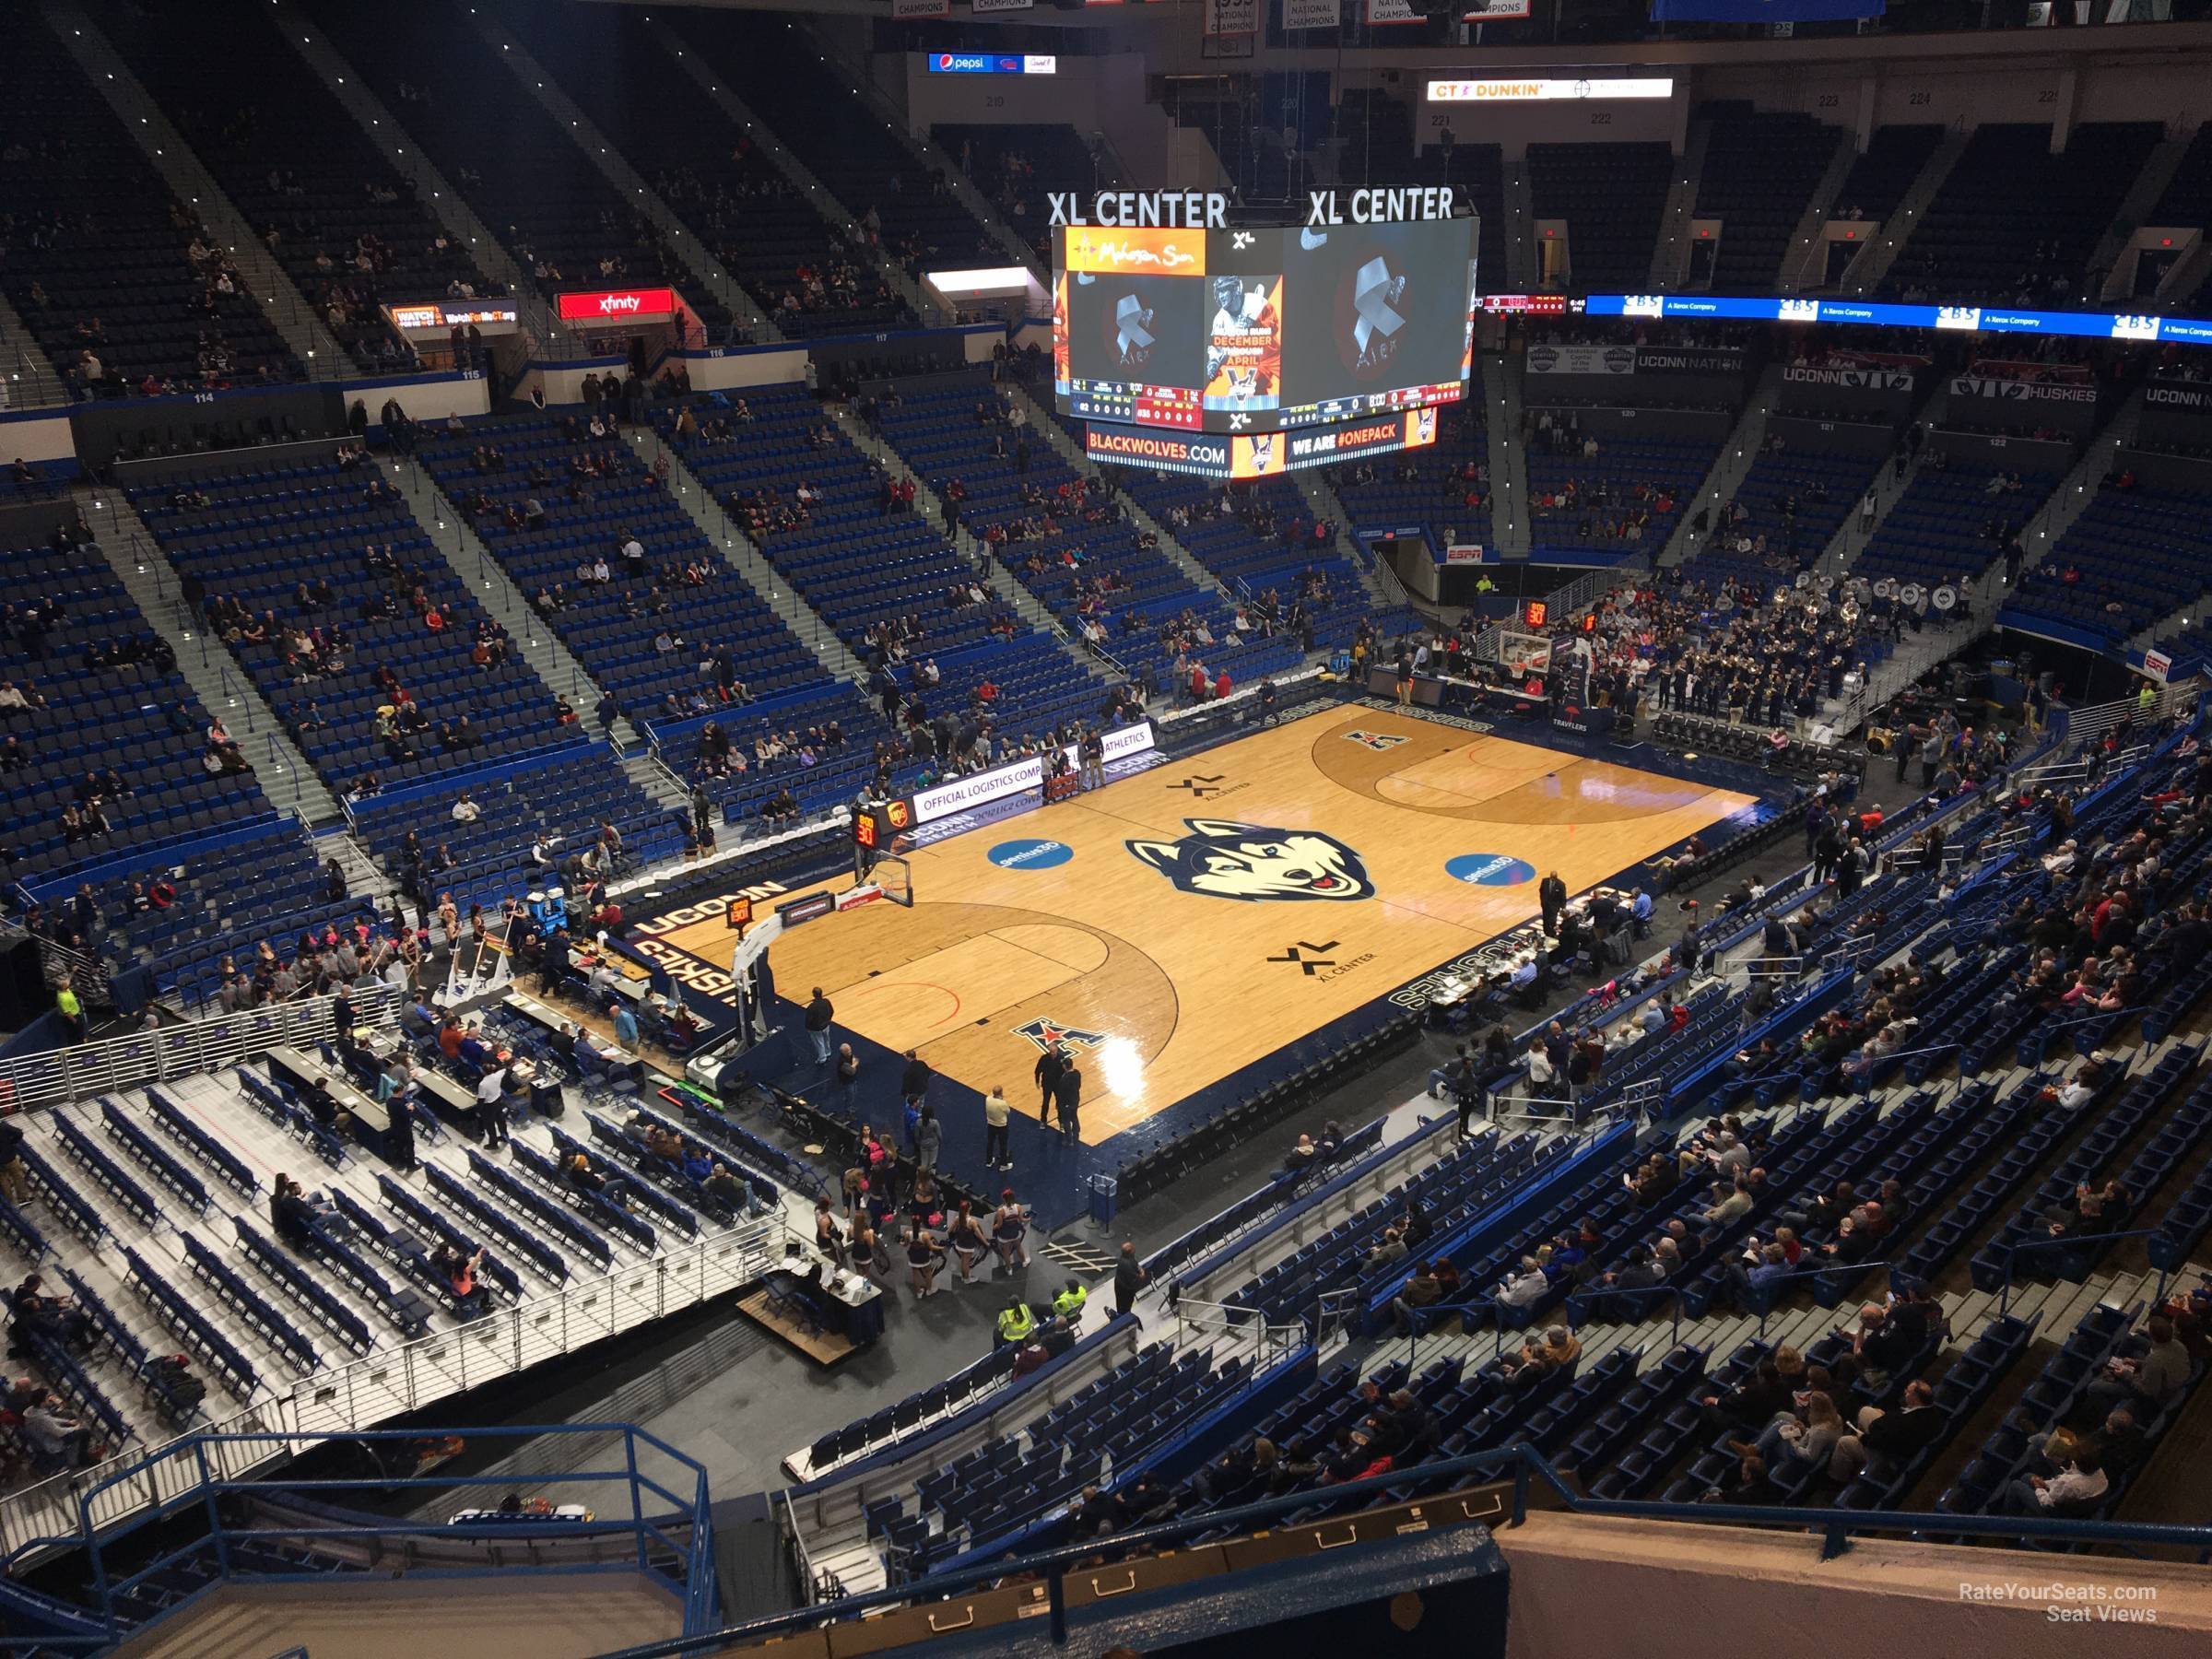 section 231, row j seat view  - xl center